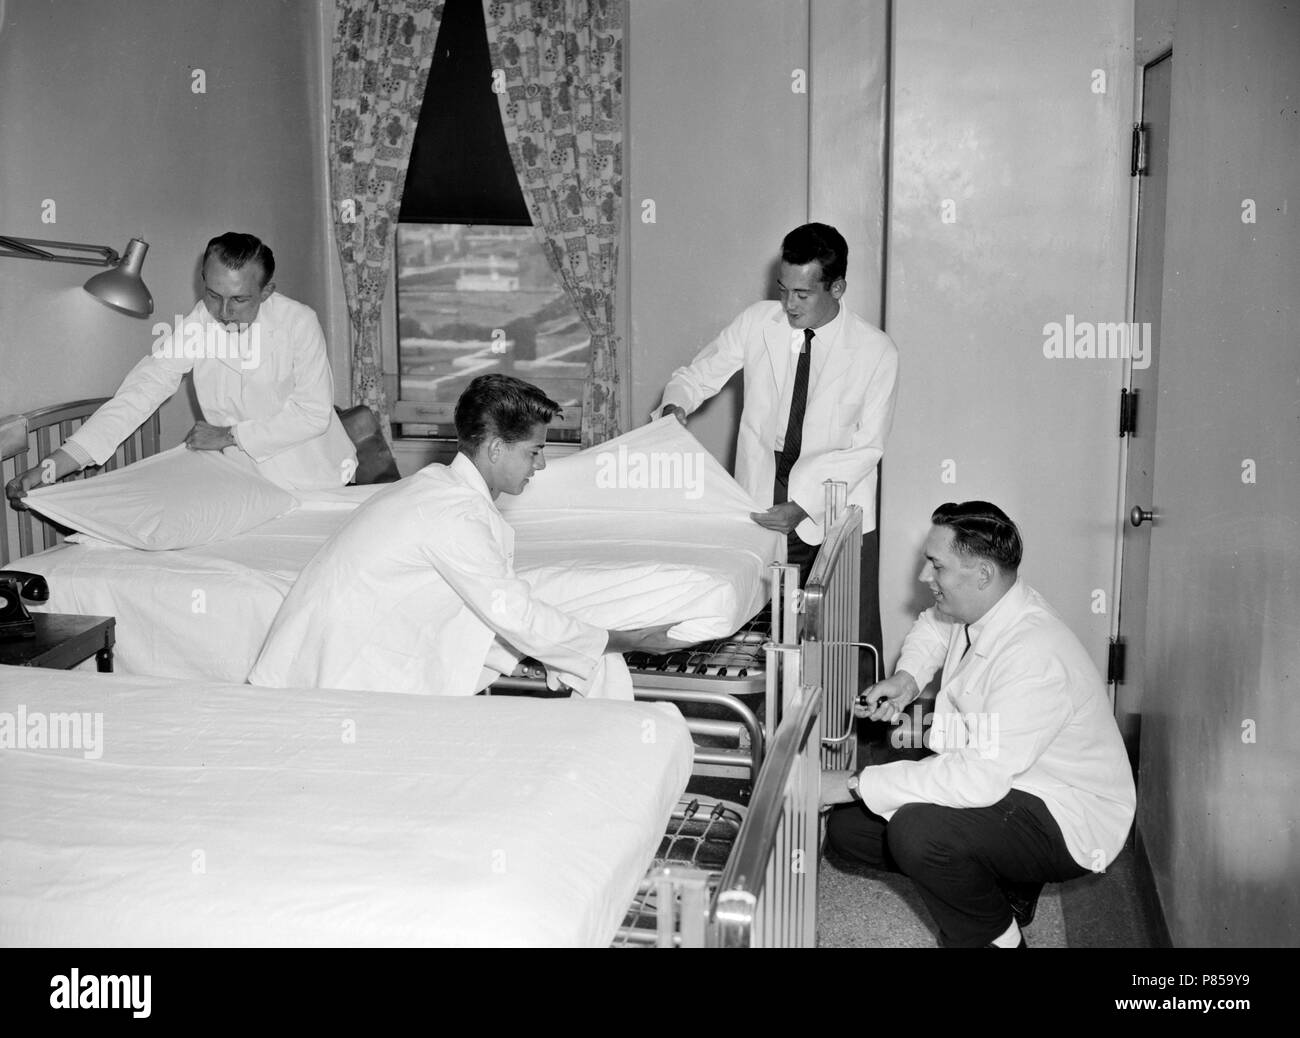 Male student nurses make-up beds at a nursing school in California, ca. 1957. Stock Photo